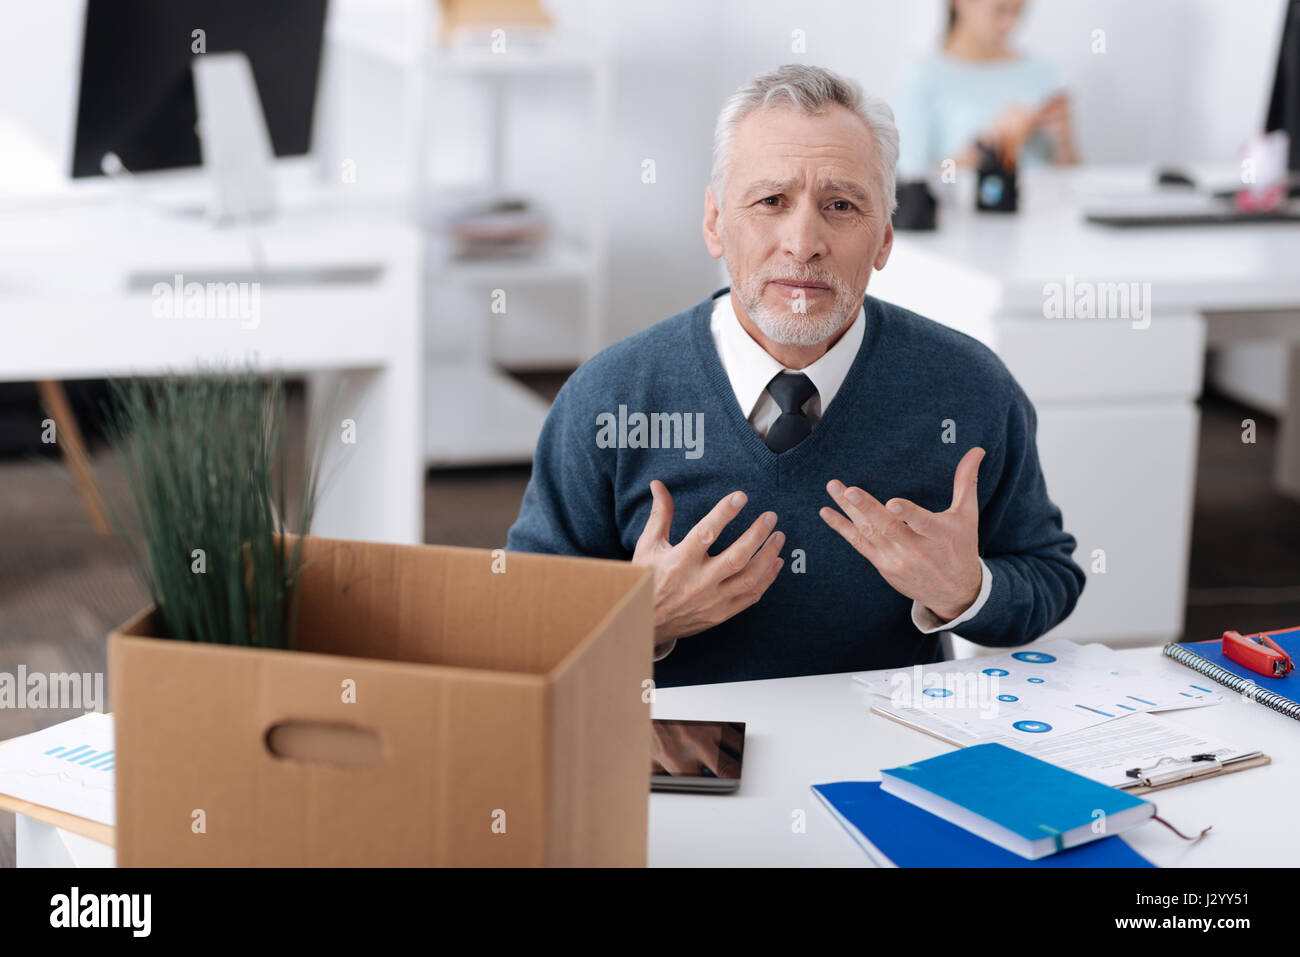 Exhausted male person rising his hands Stock Photo